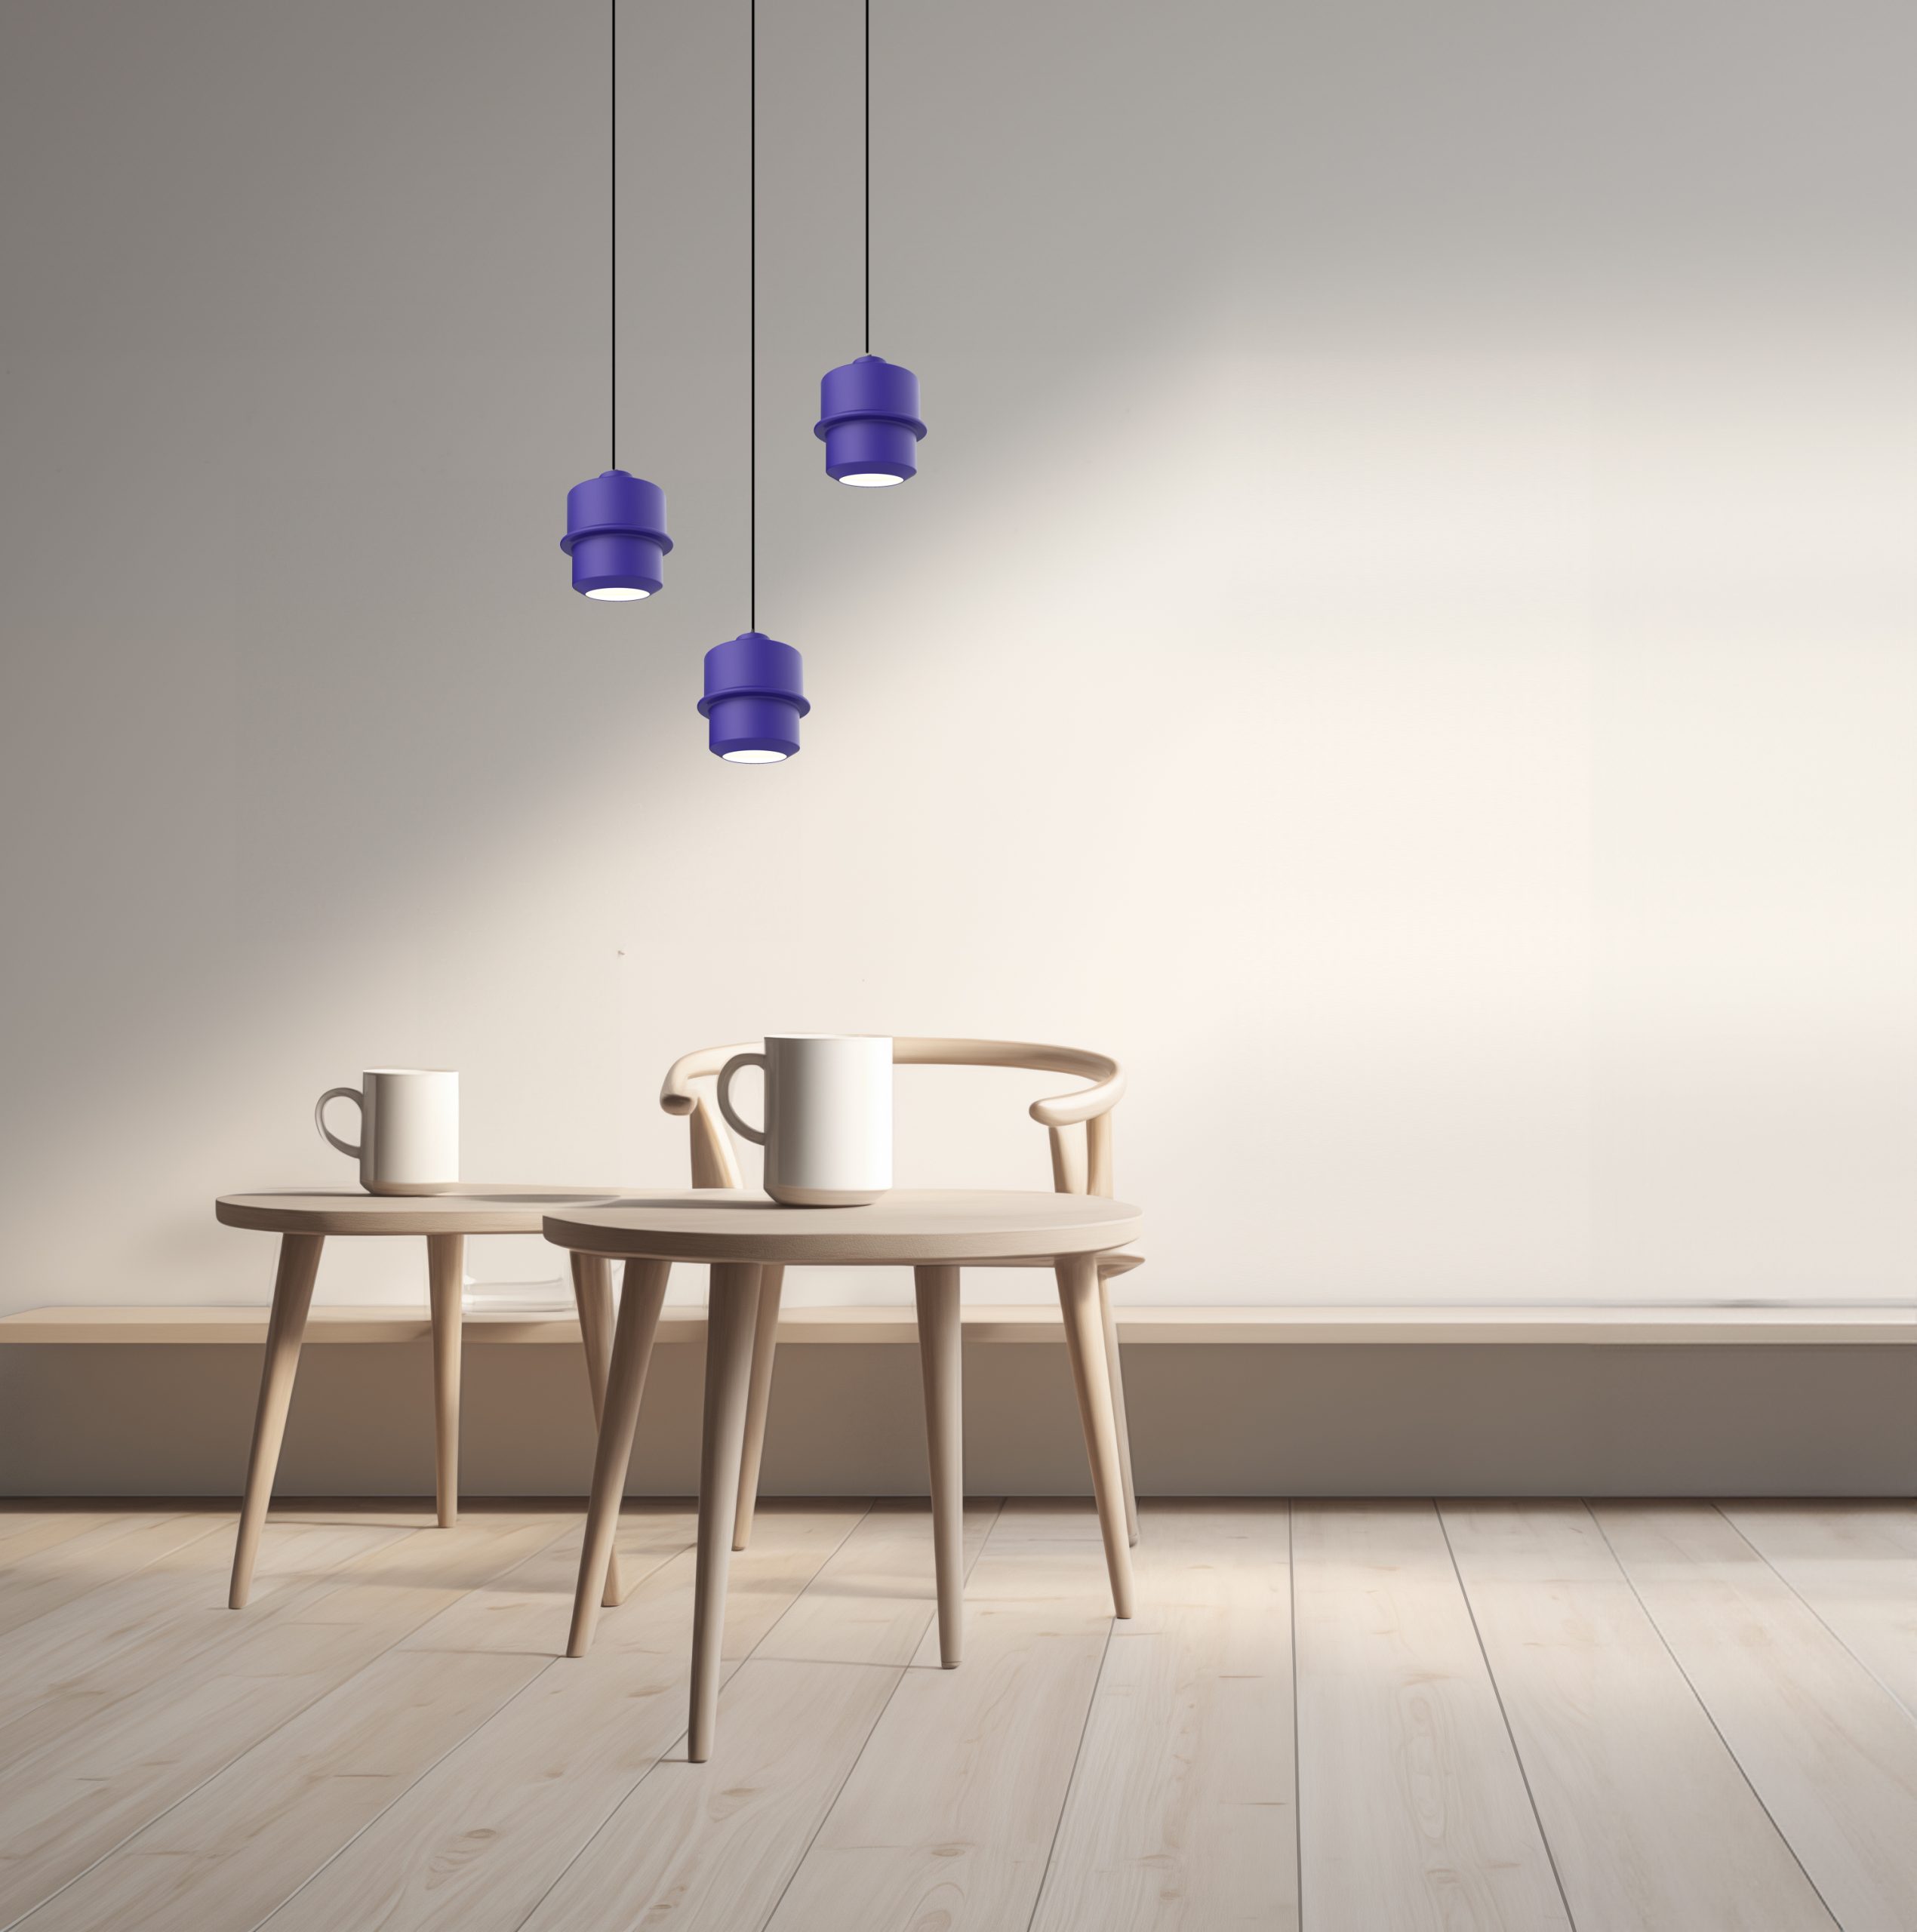 flash small pendant light royal blue metal aluminuim above dining table living room cafe coffee table